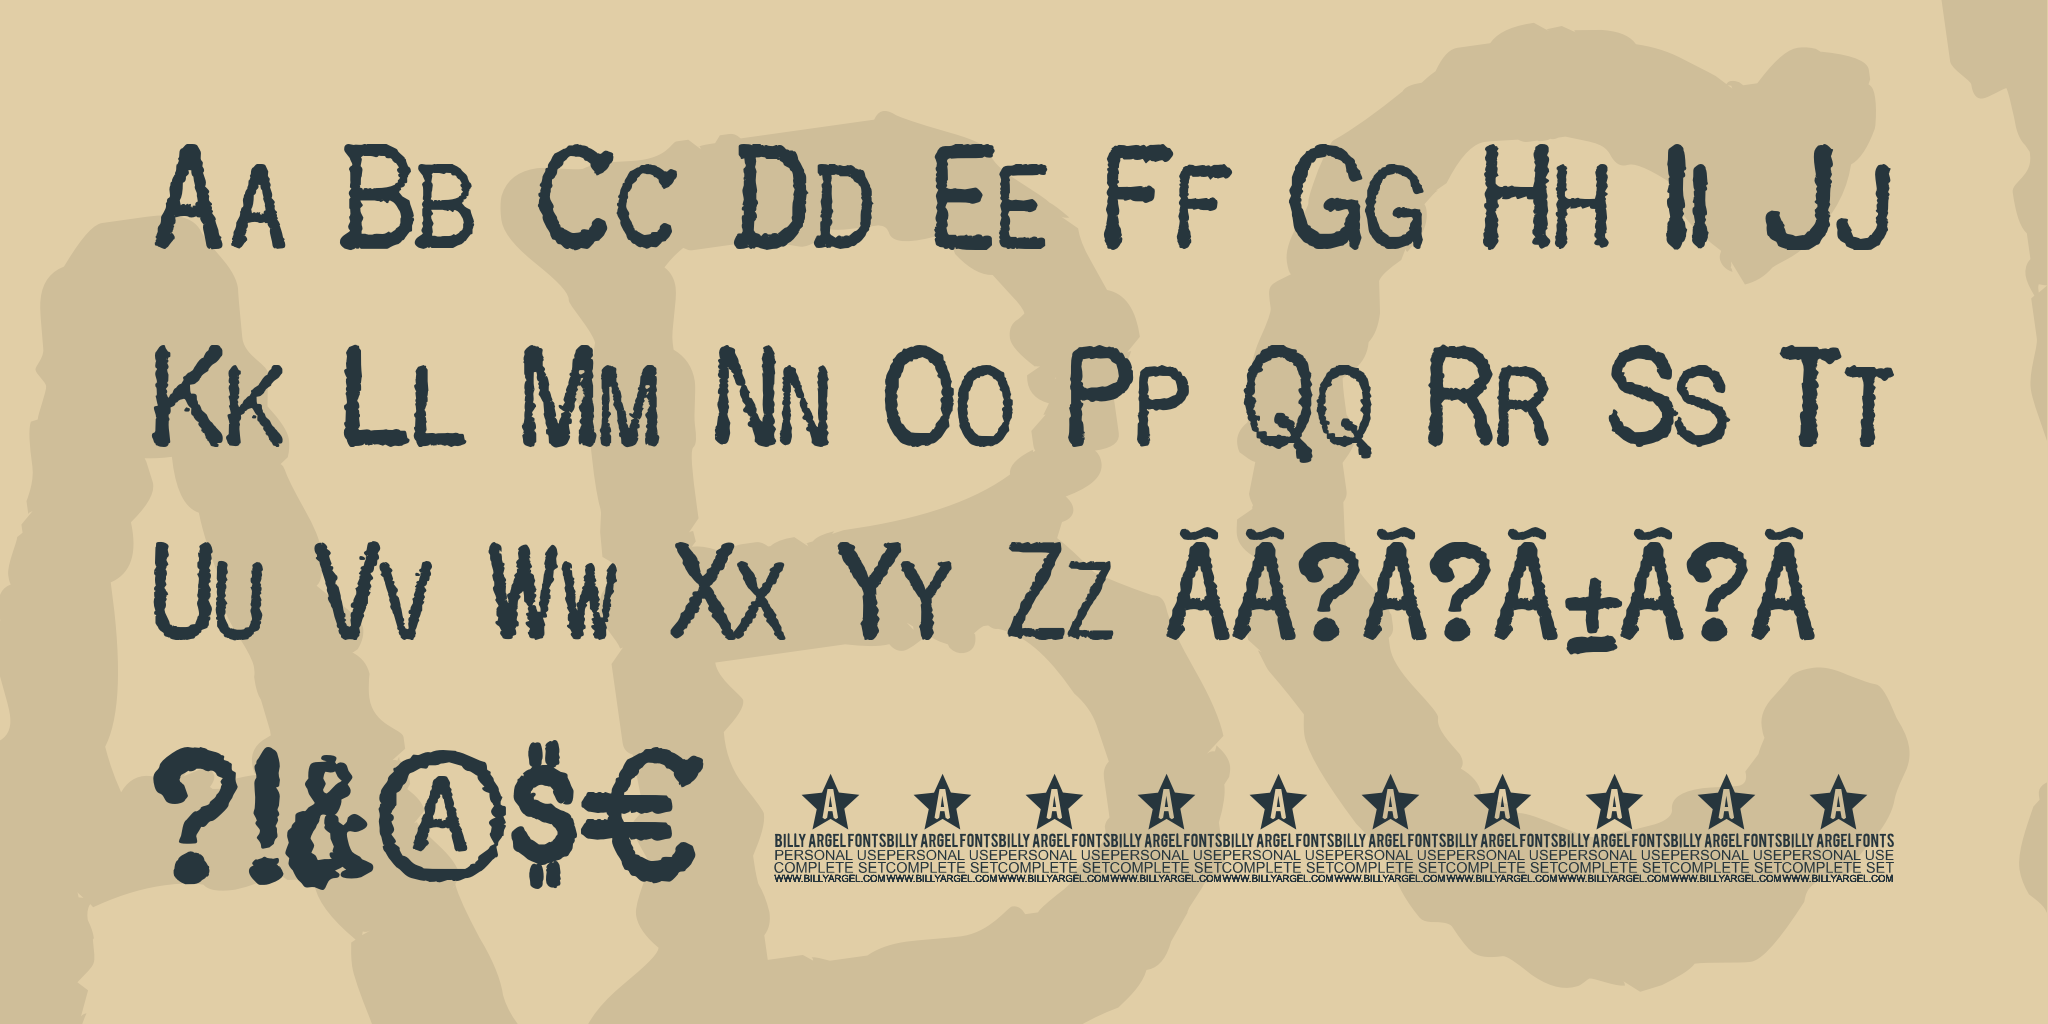 history and uses of old style typeface